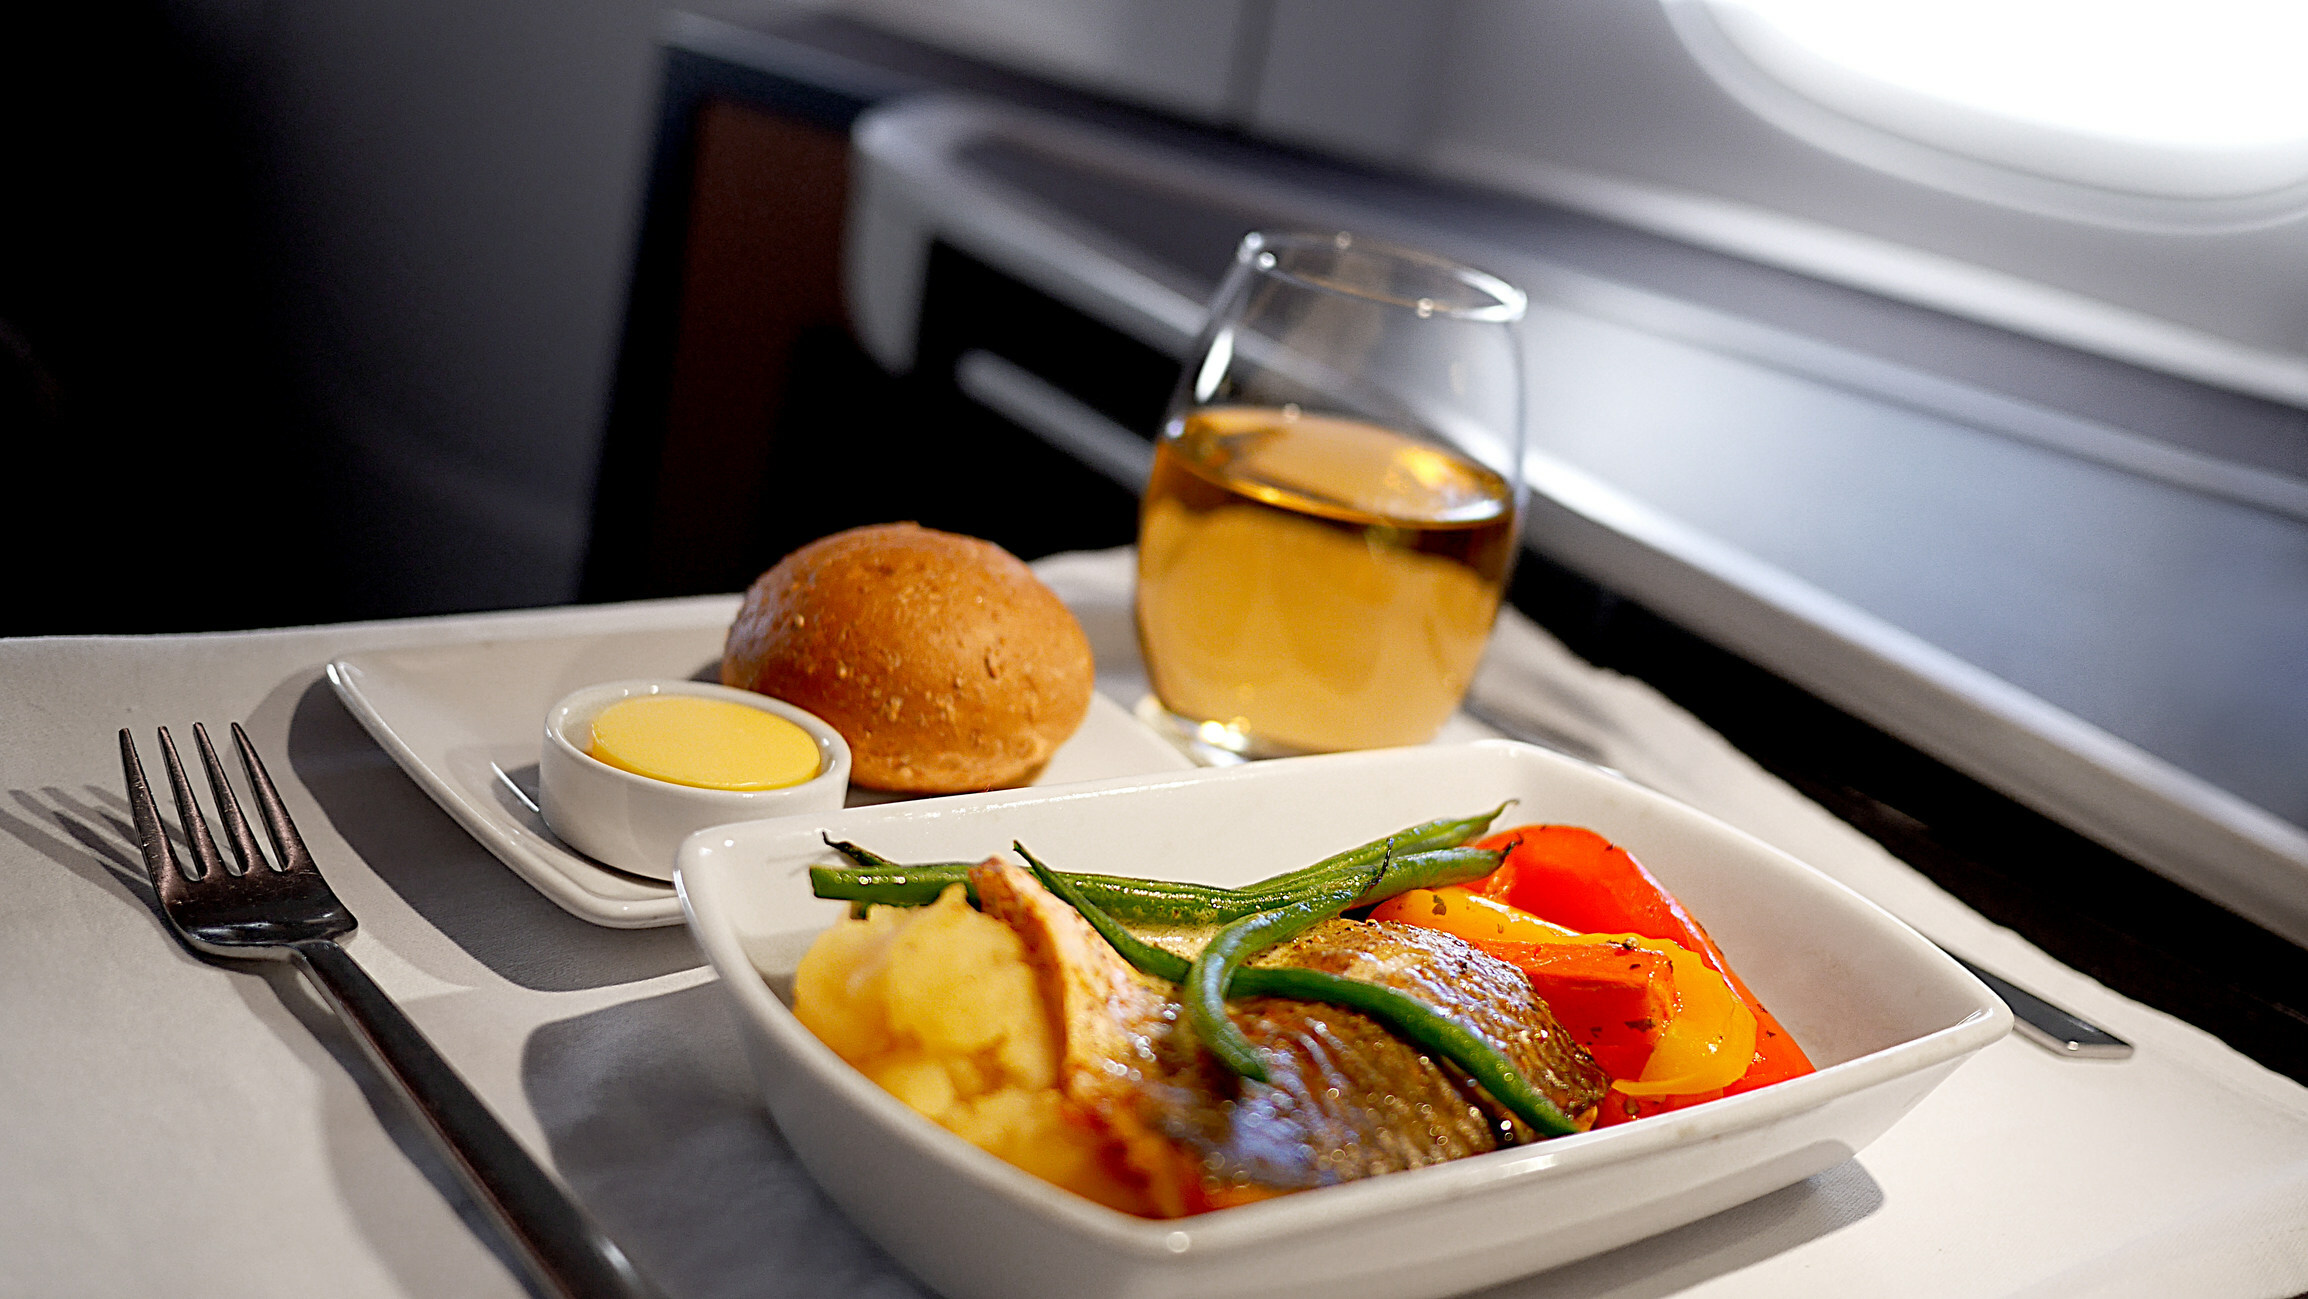 An inflight catering meal aboard a commercial flight.